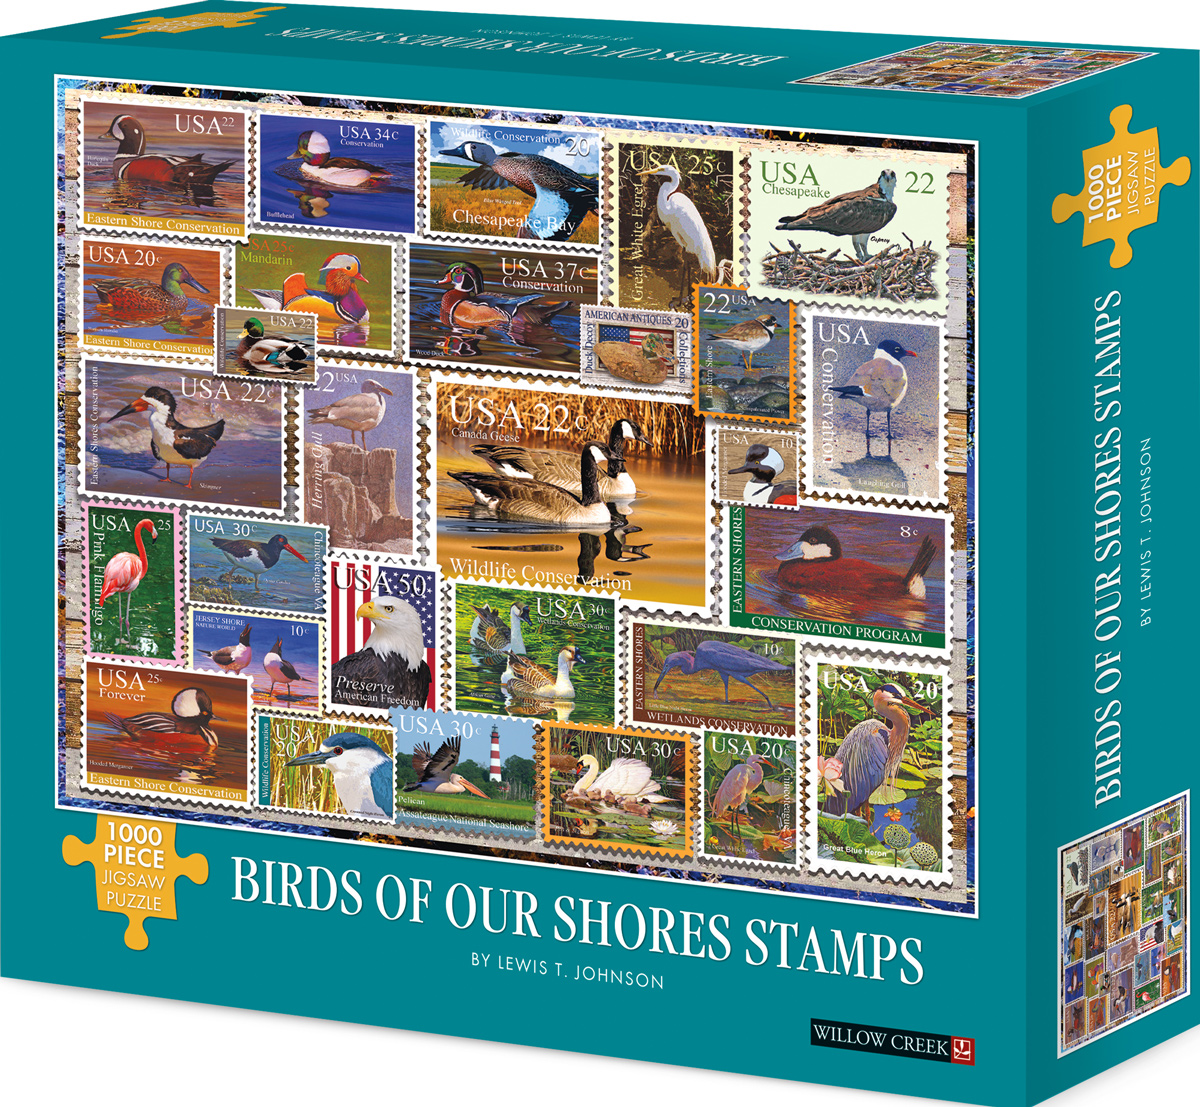 Birds of Our Shores Stamps